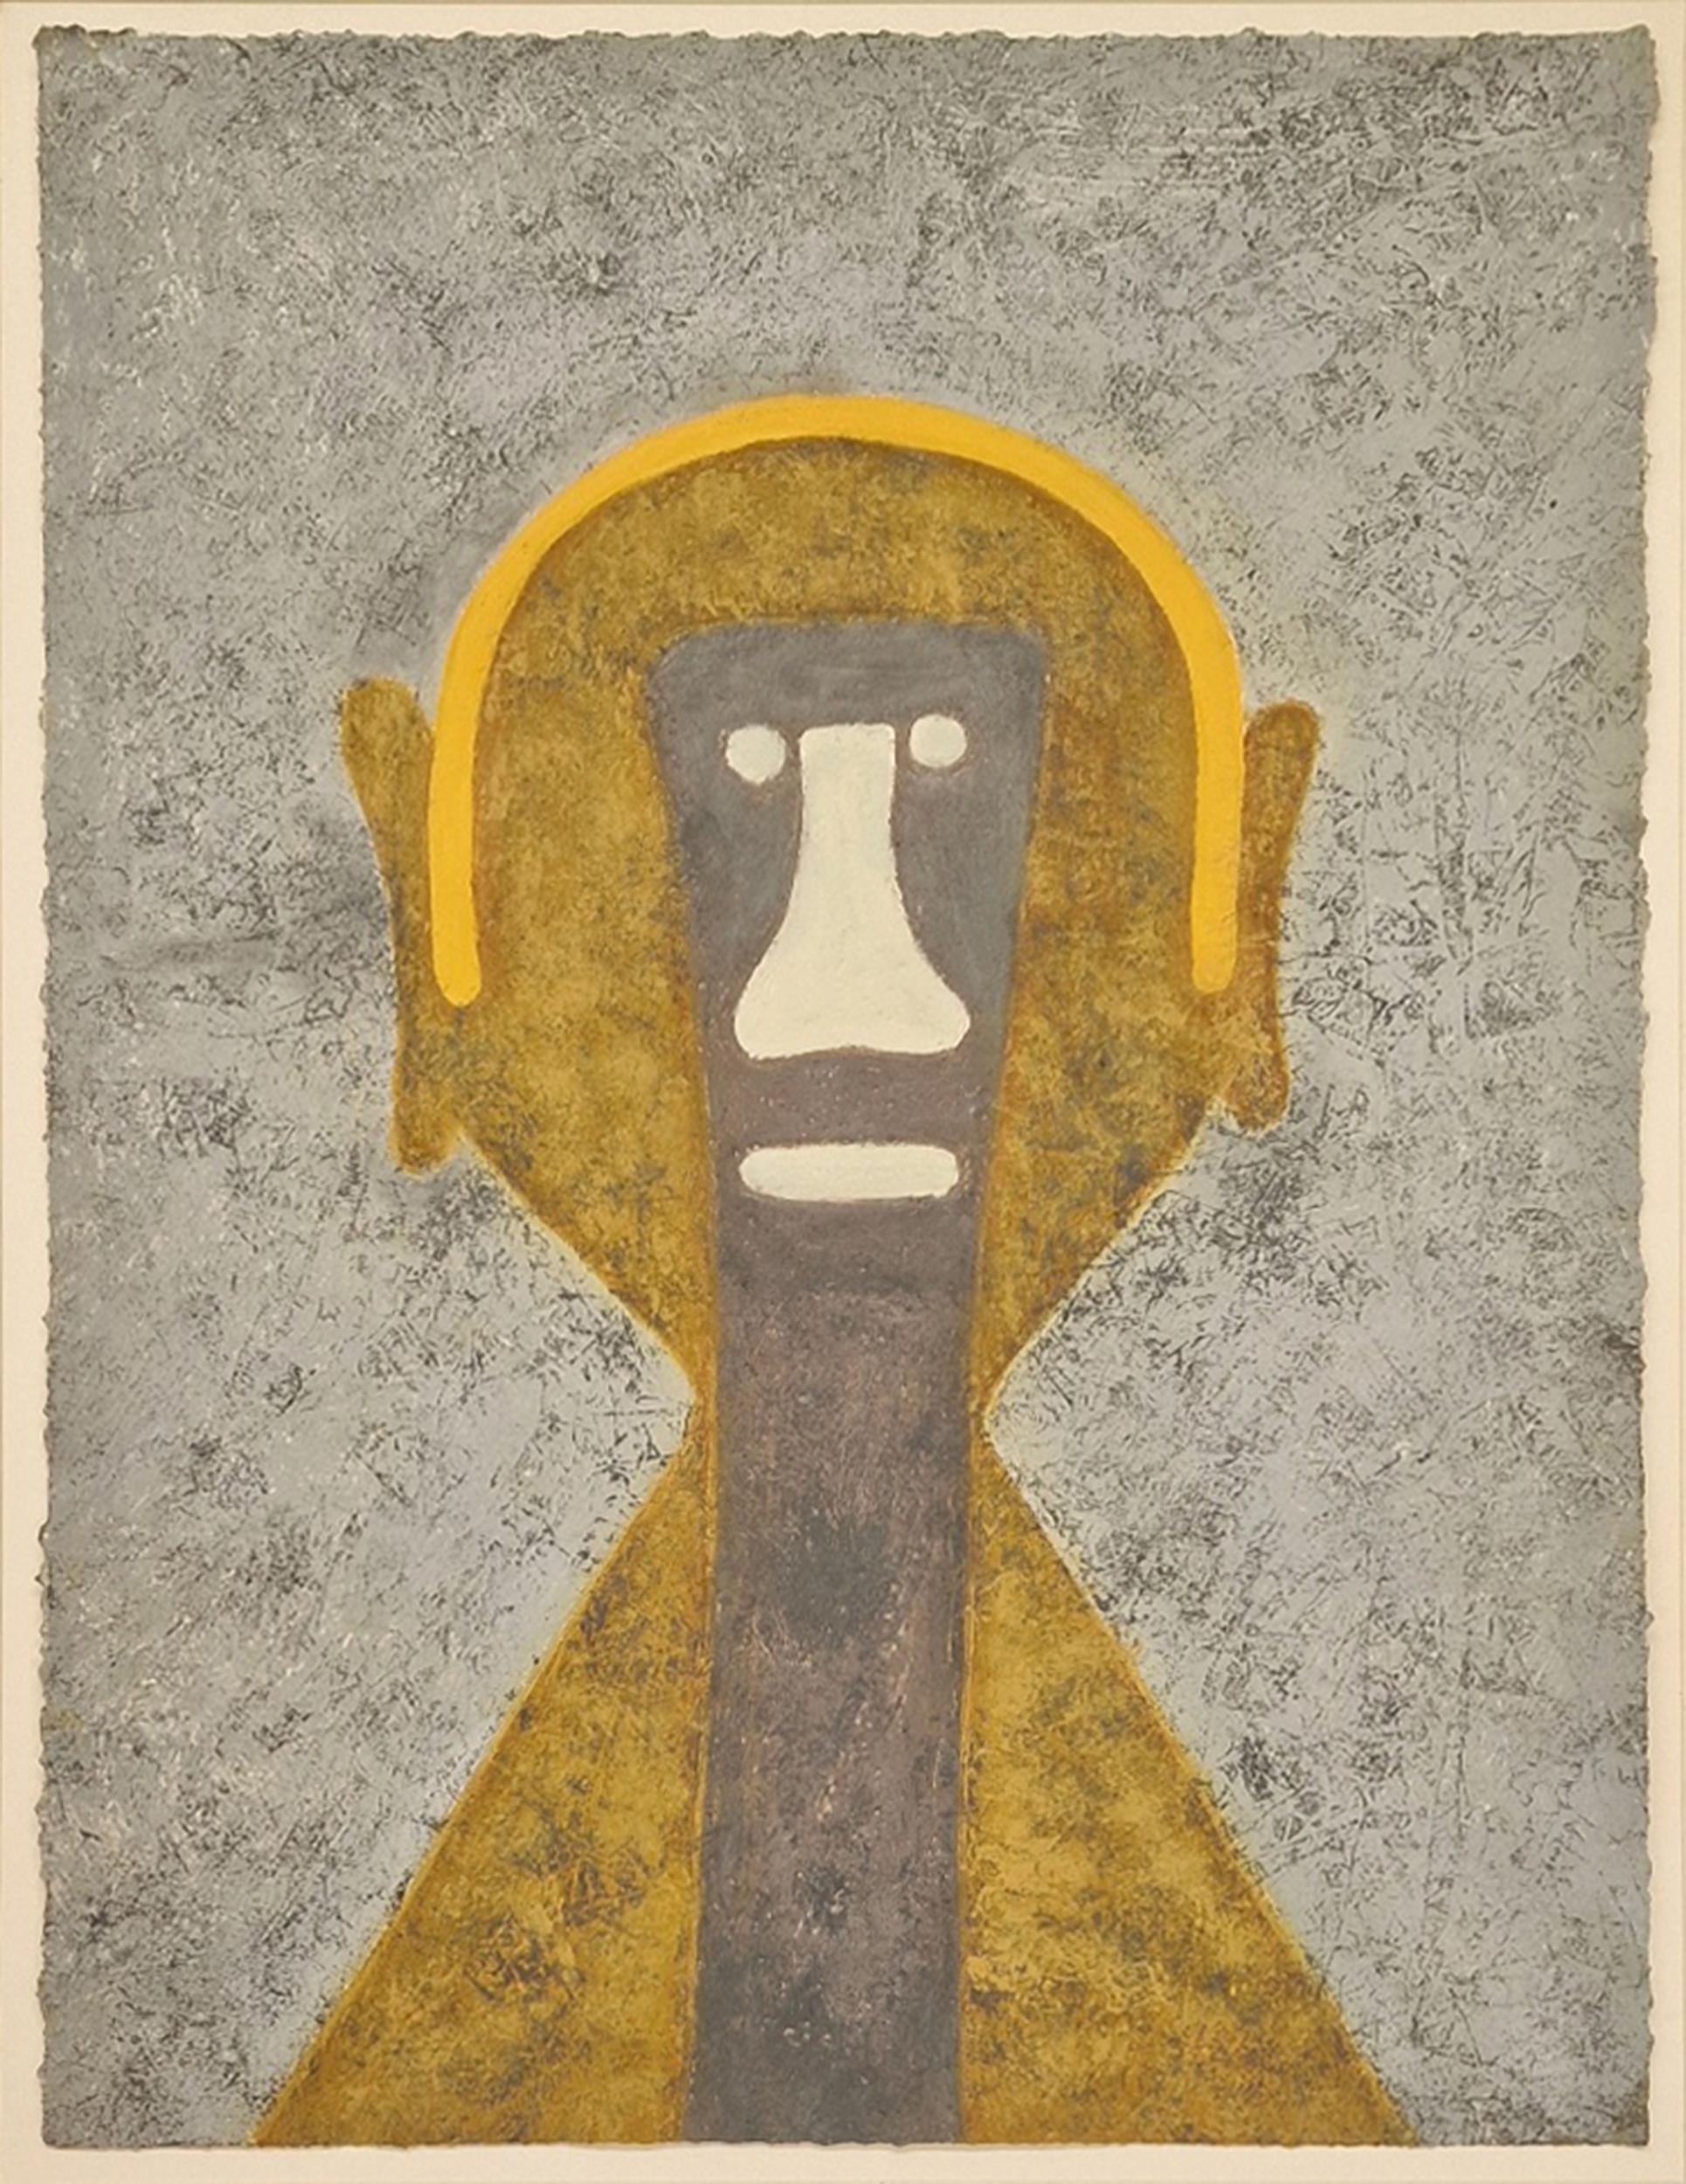 A Surrealist etching by Mexican artist Rufino Tamayo of a simple yellow figure against a gray background, staring at the viewer with piercing white eyes. This piece is one of 5 unnumbered HC prints off of a print run featuring 99 numbered editions.